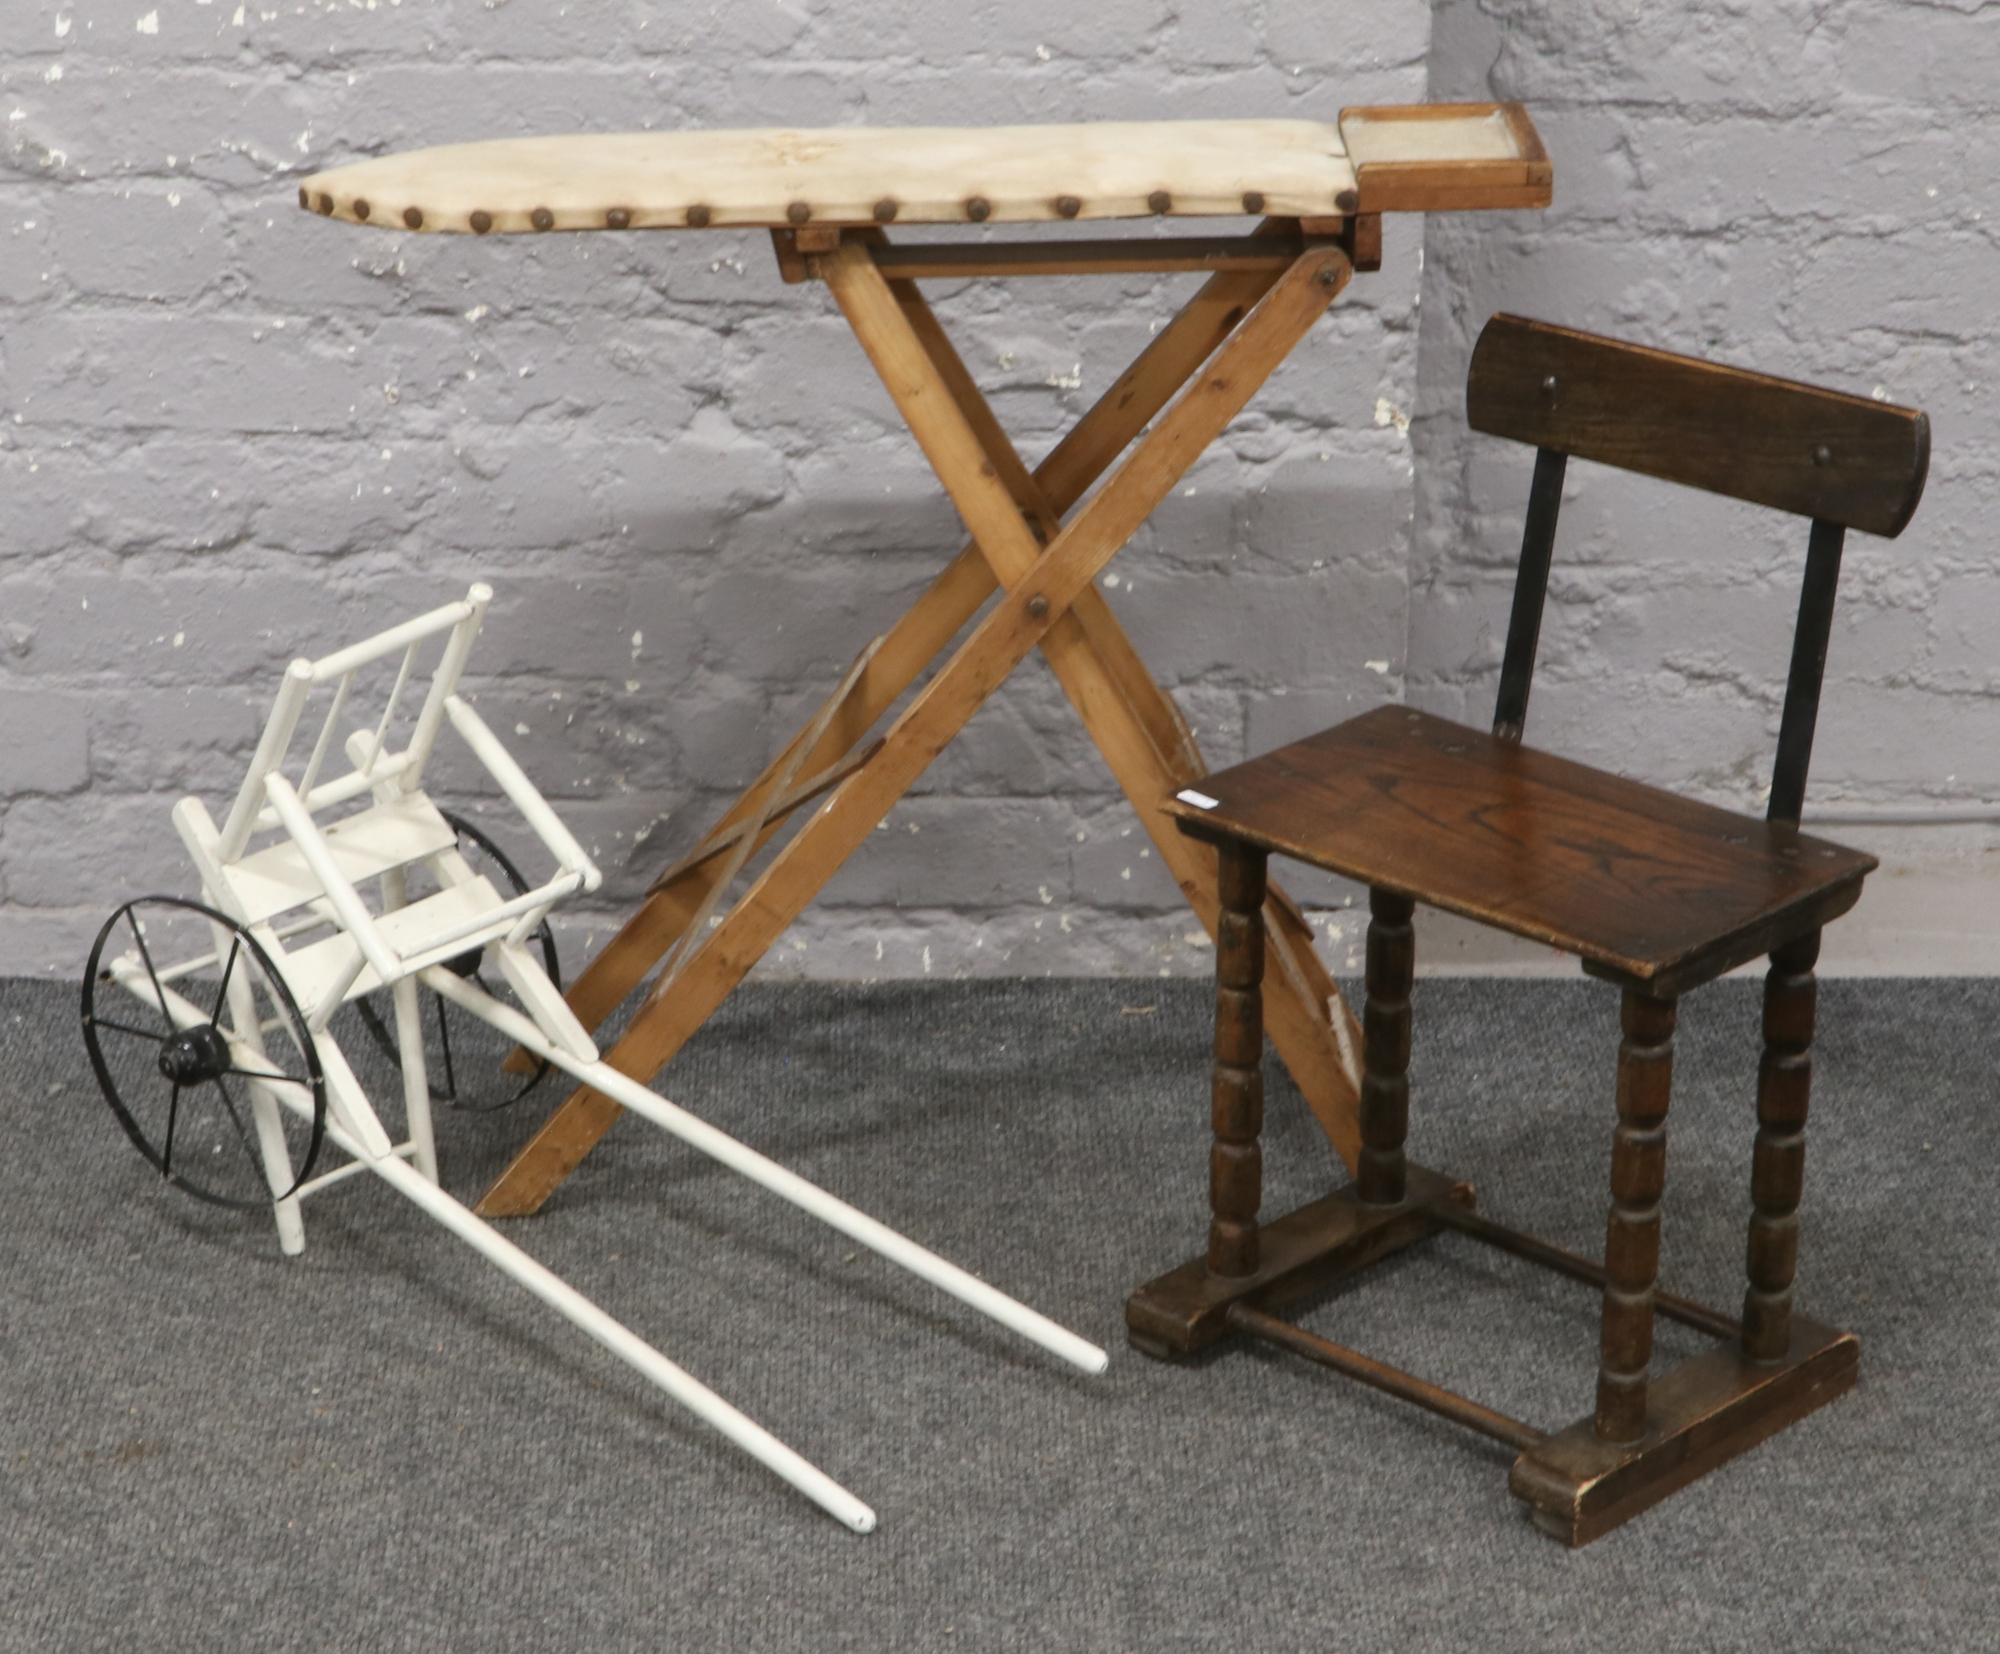 A child's ironing board, chair and pull along cart.